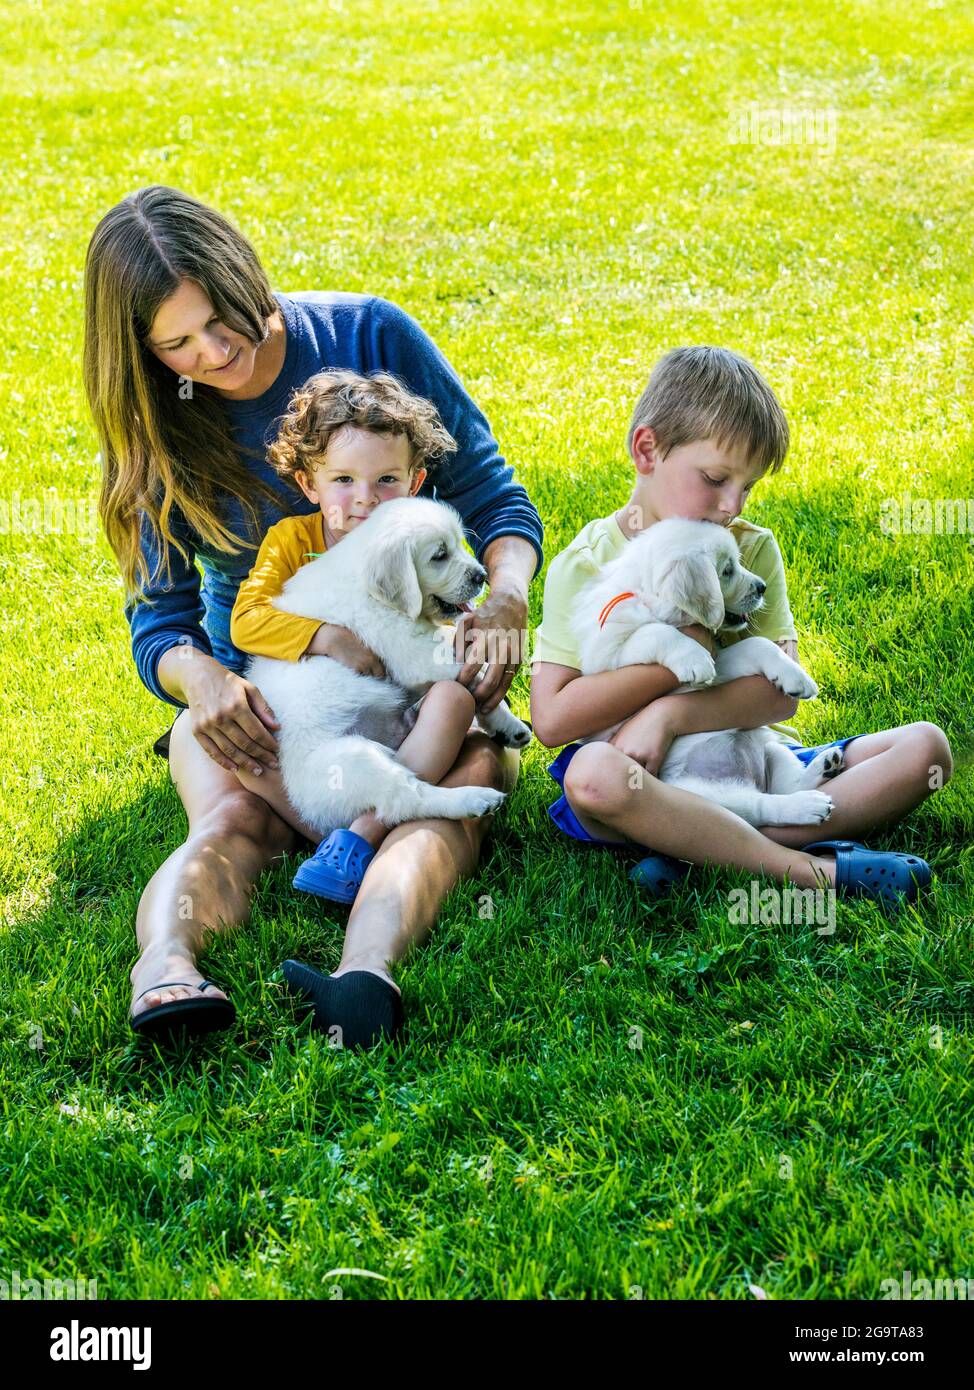 Mother and young children playing on grass with six week old Platinum, or Cream colored Golden Retriever puppies. Stock Photo